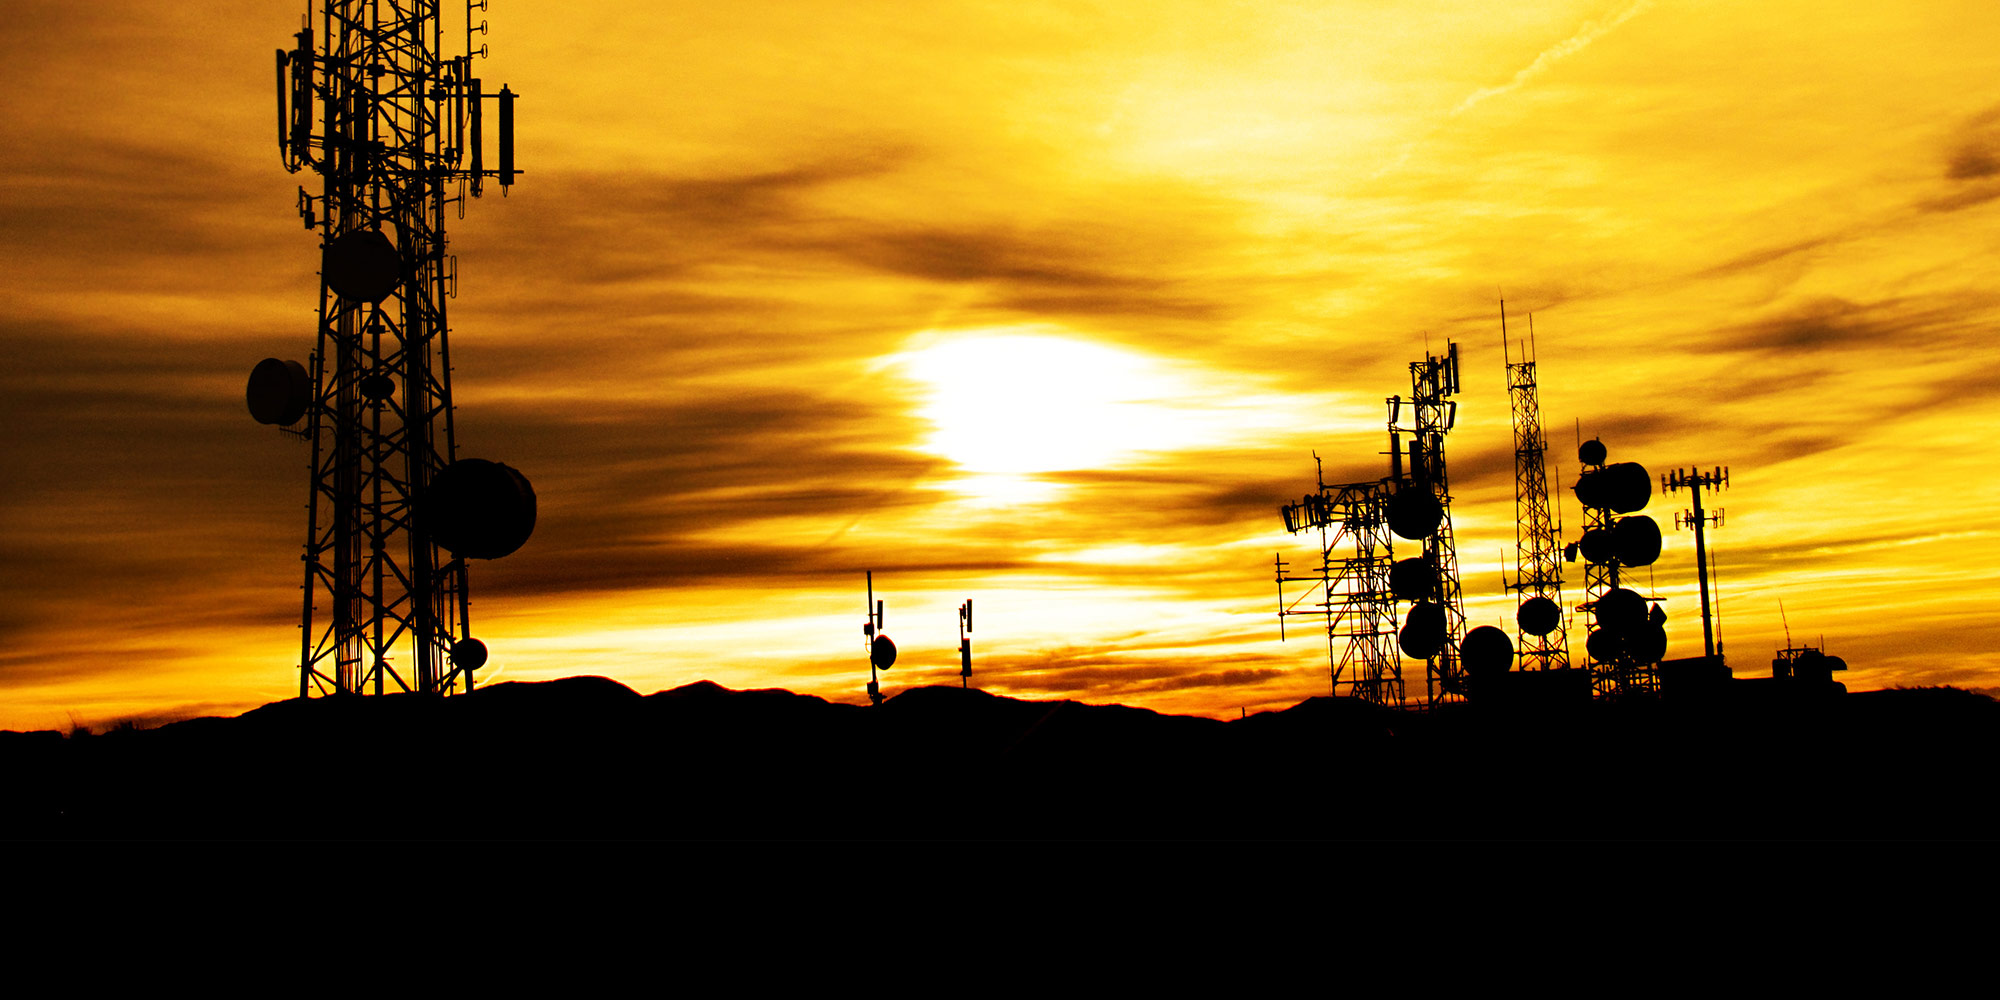 silhouette of transmission towers at sunset